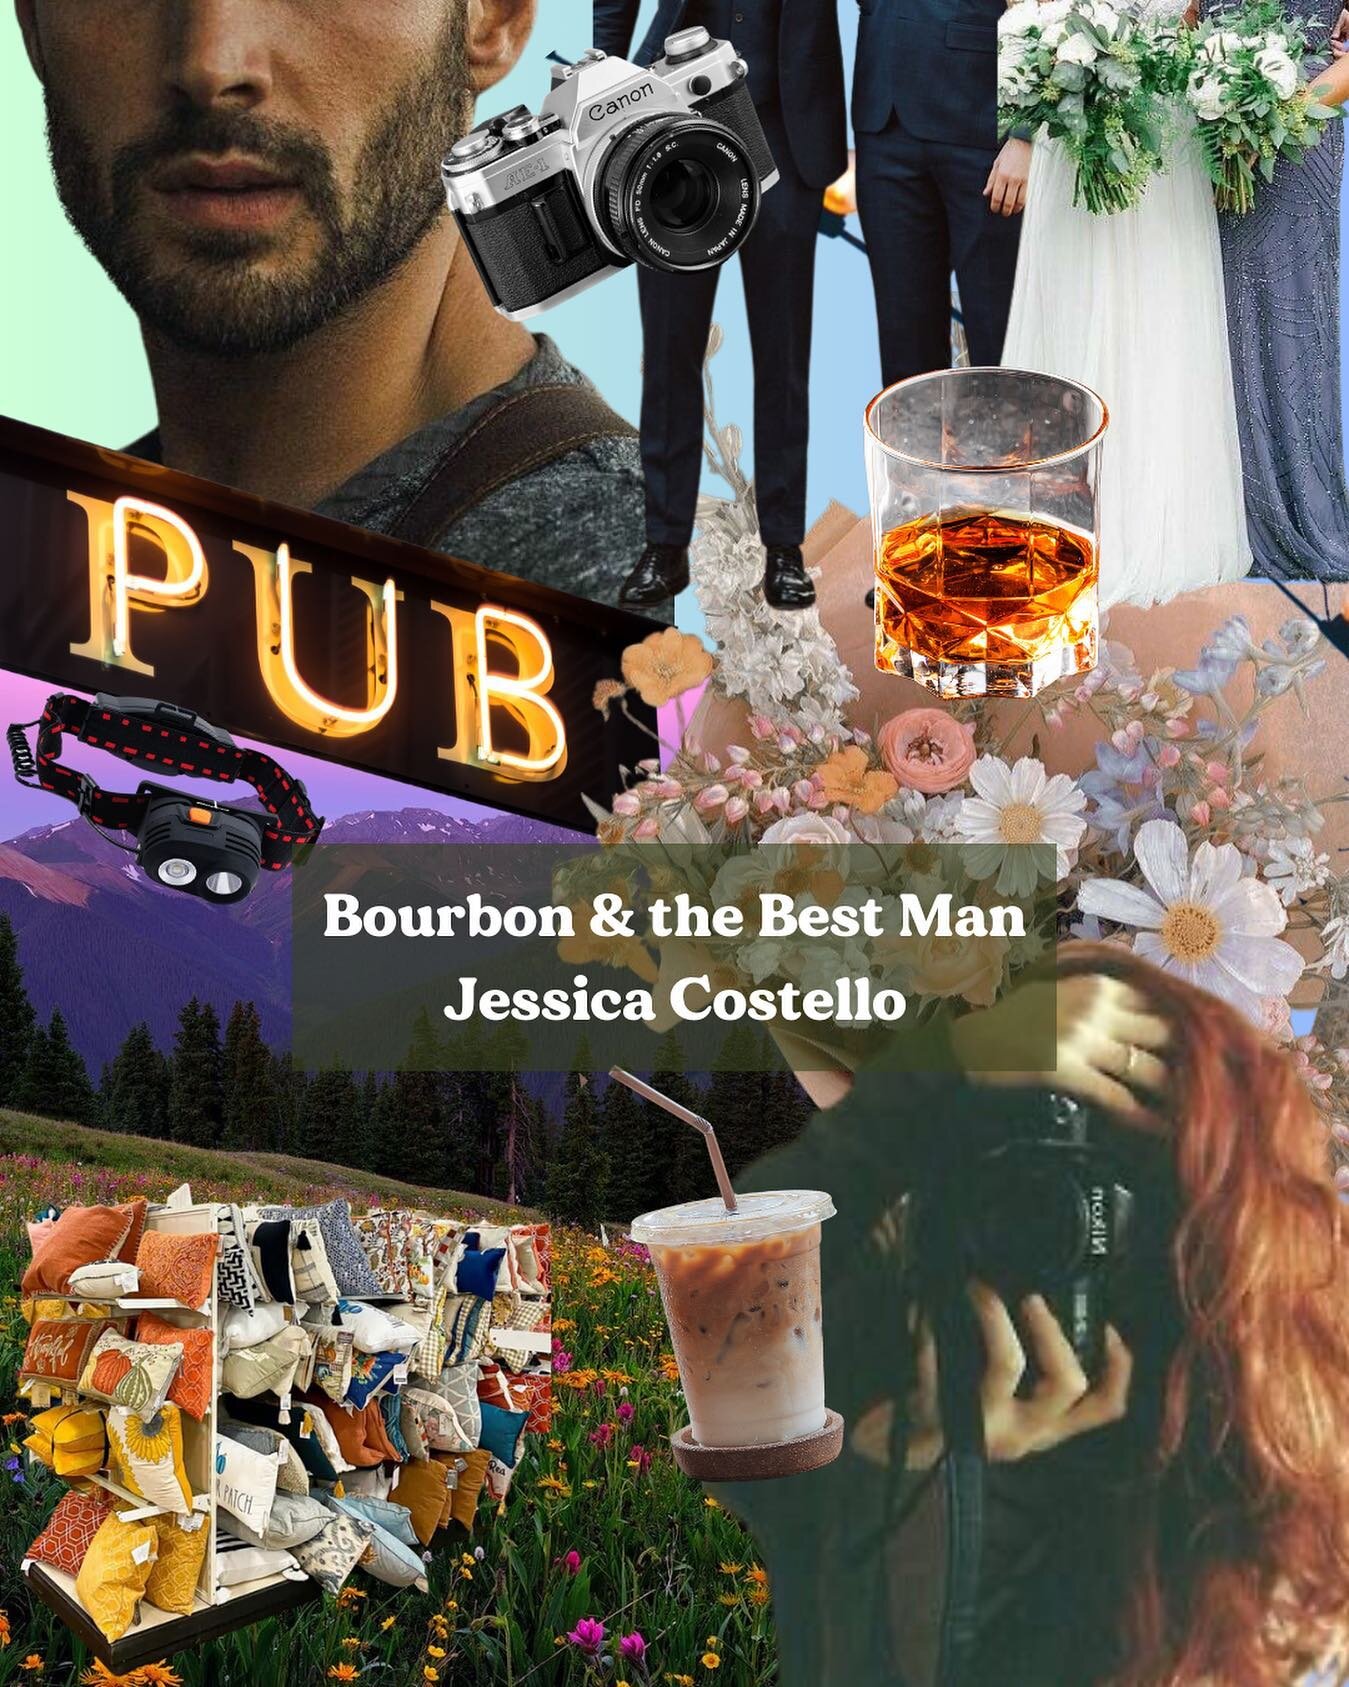 Bourbon &amp; the Best Man aesthetic post, anyone?

If any of these have you confused, I&rsquo;ve done my job 😂 if some of these don&rsquo;t make sense, I promise they will someday!

In no particular order, you can find these things in B&amp;BM:
-He